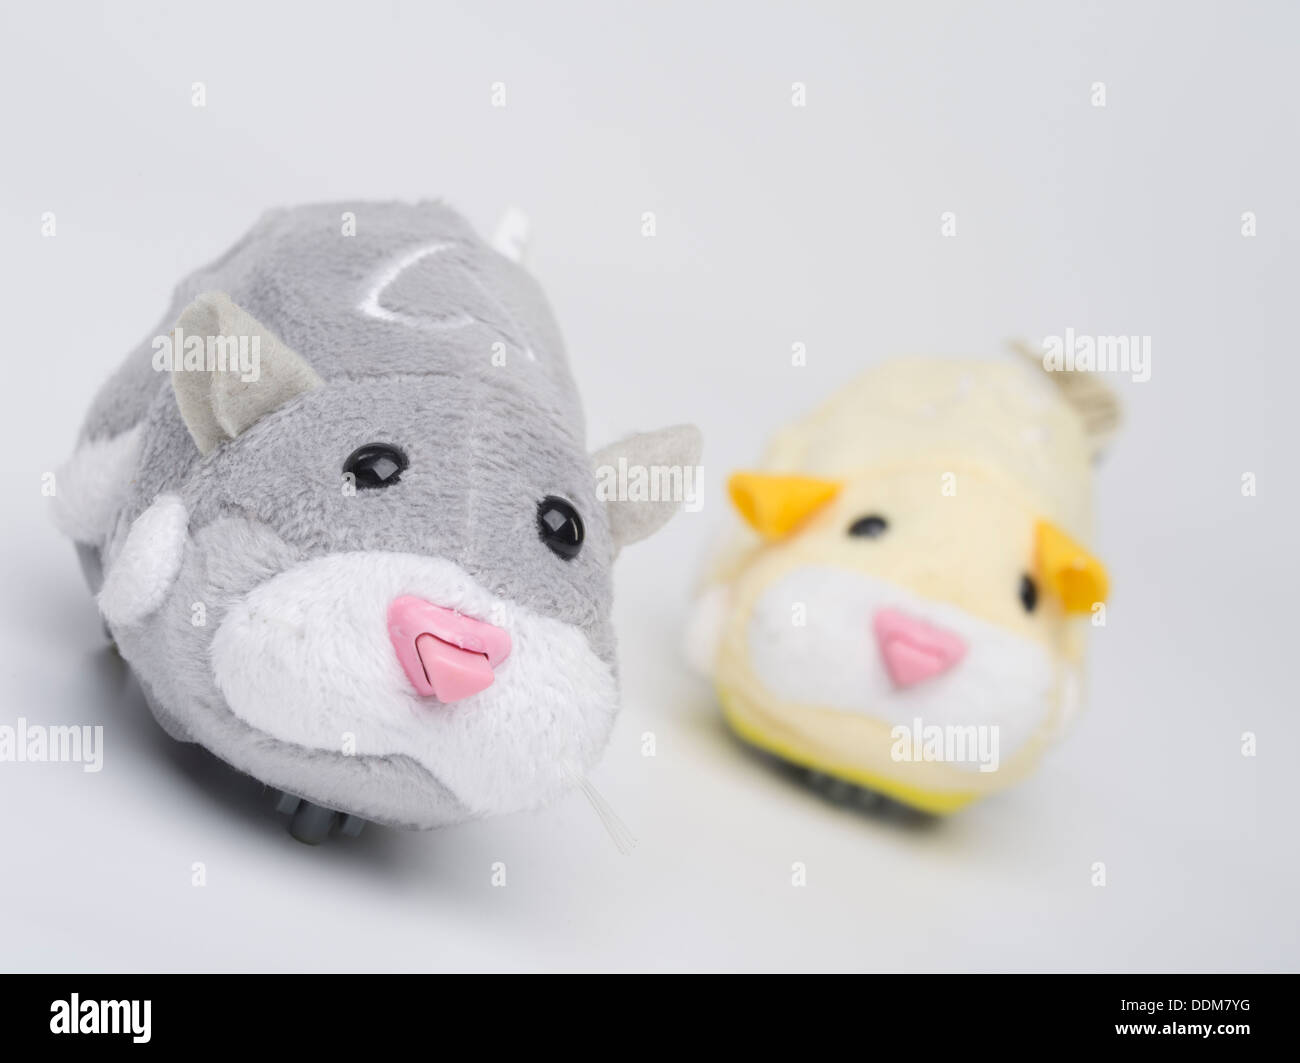 Zhu Zhu Pets by Cepia LLC Robotic hamster toys that were at Christmas 2009 craze Stock Photo